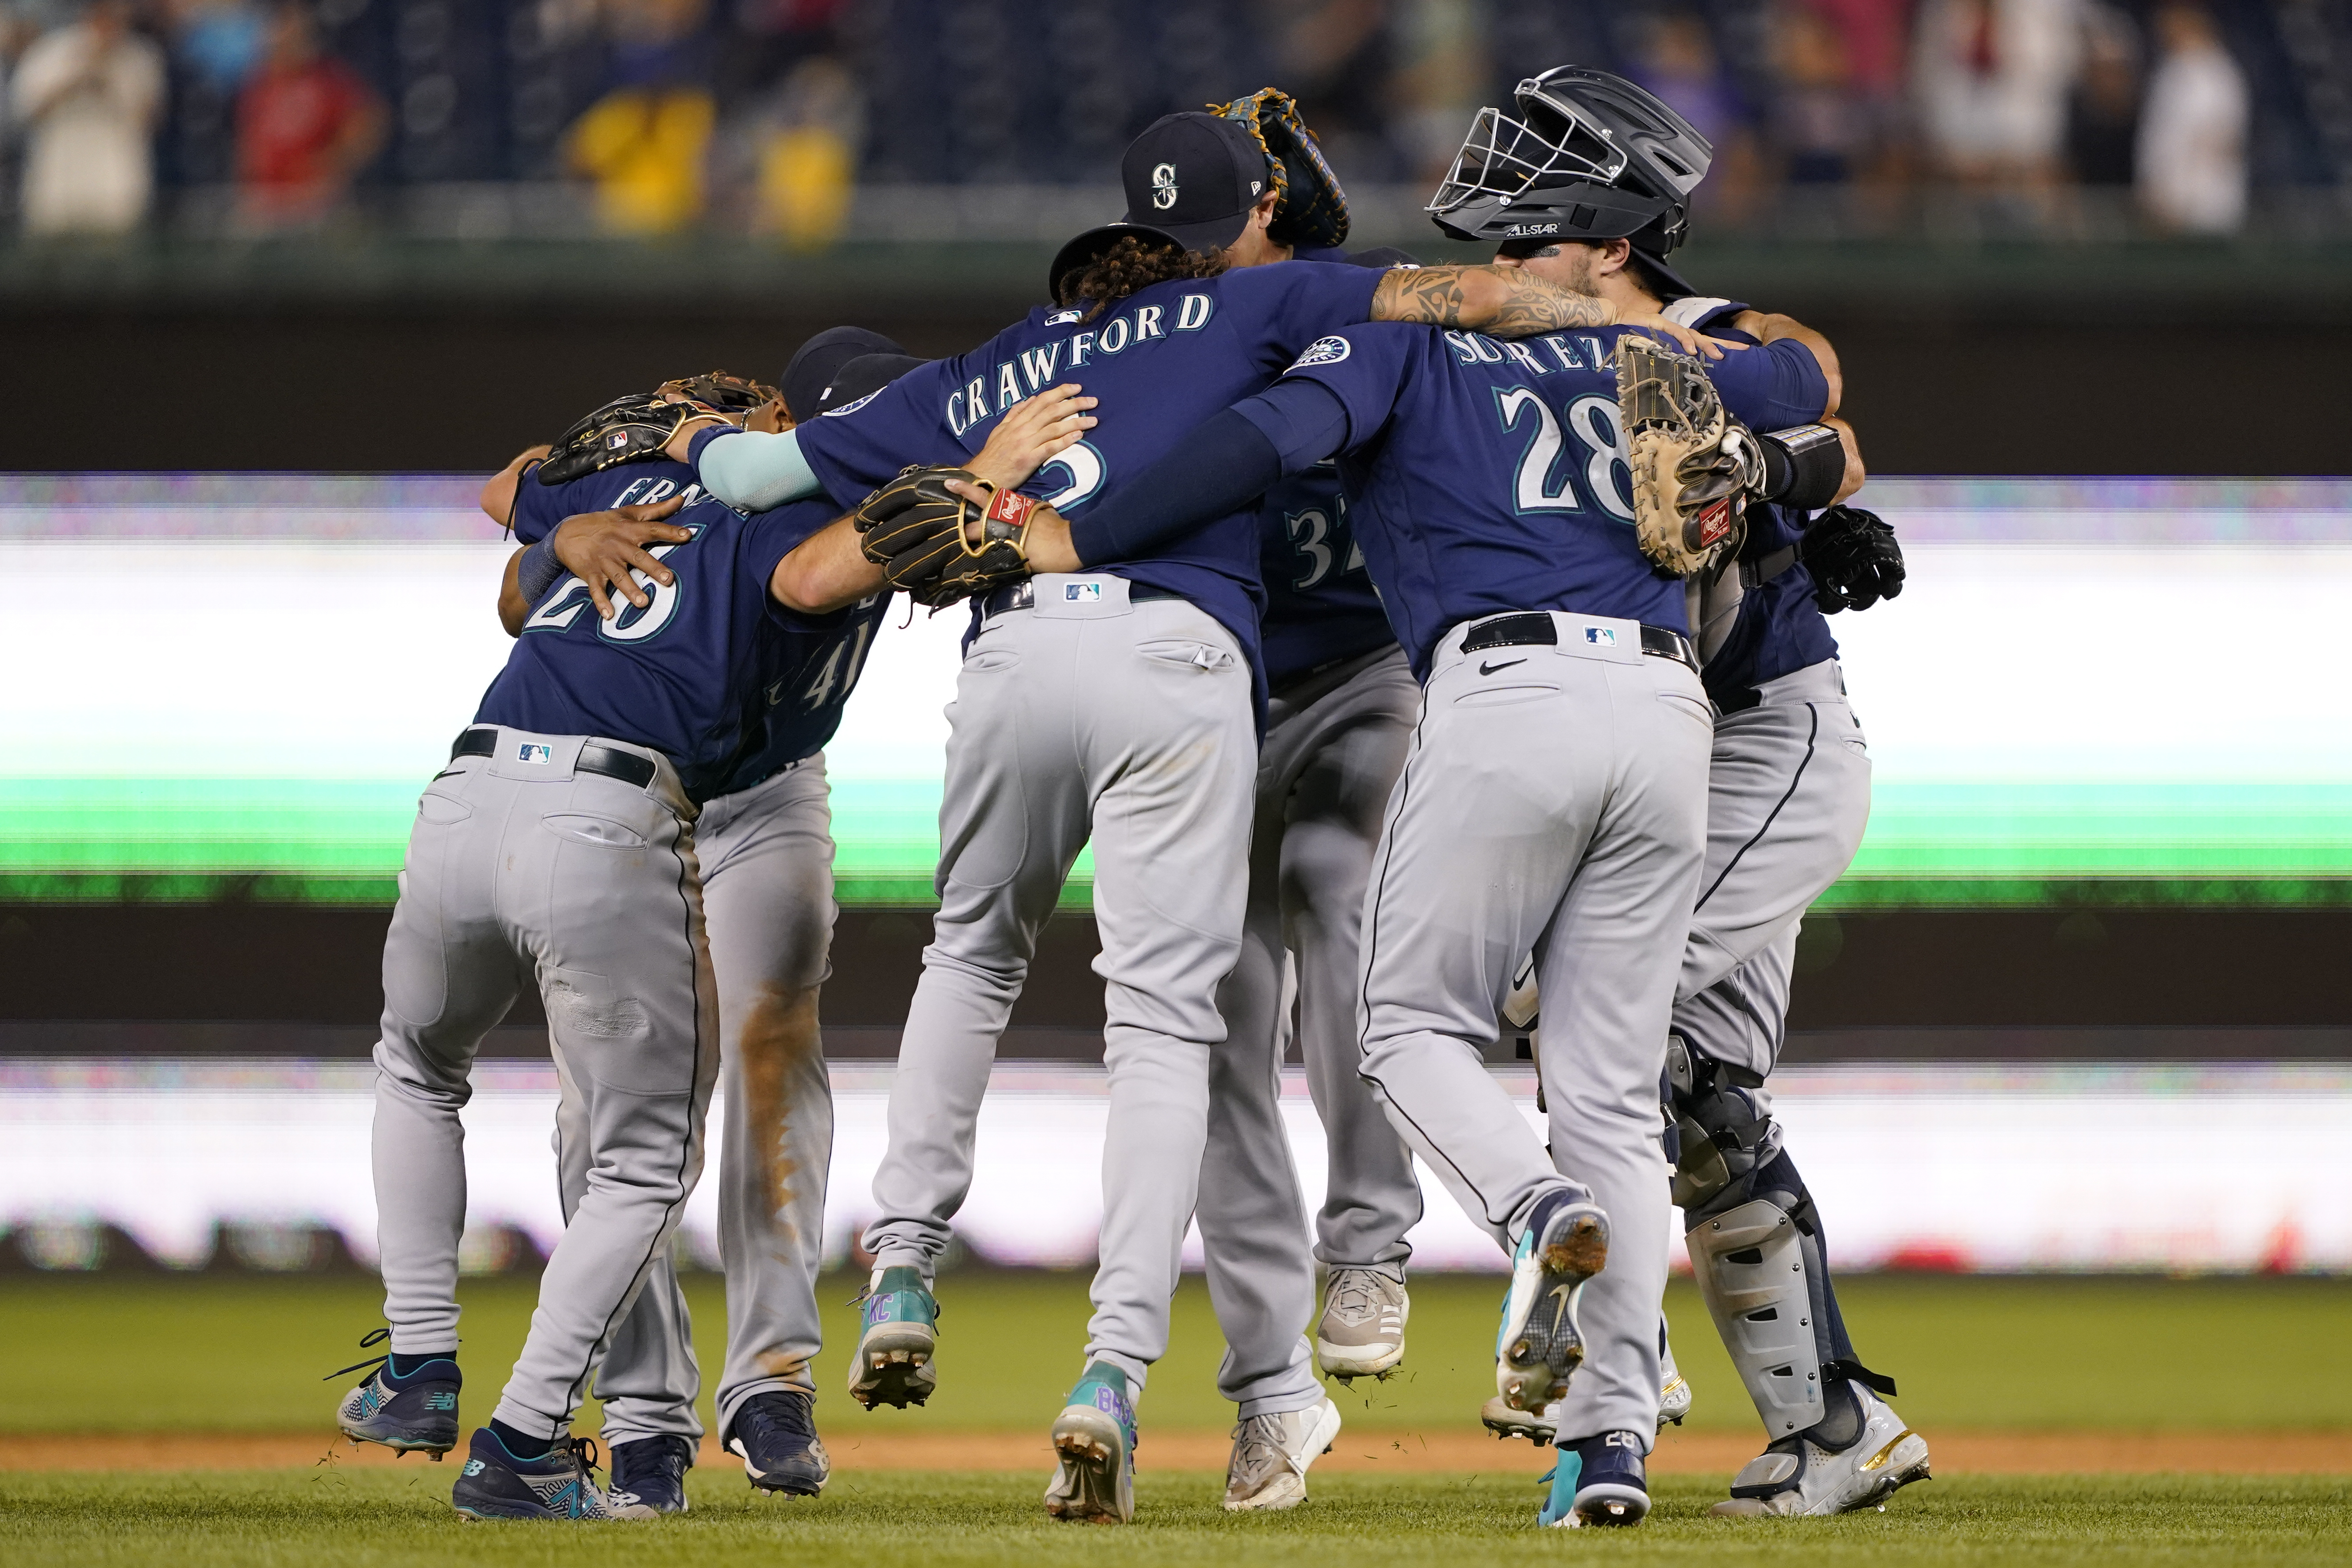 Cal Raleigh's homer jump-starts Mariners as they win seventh in row